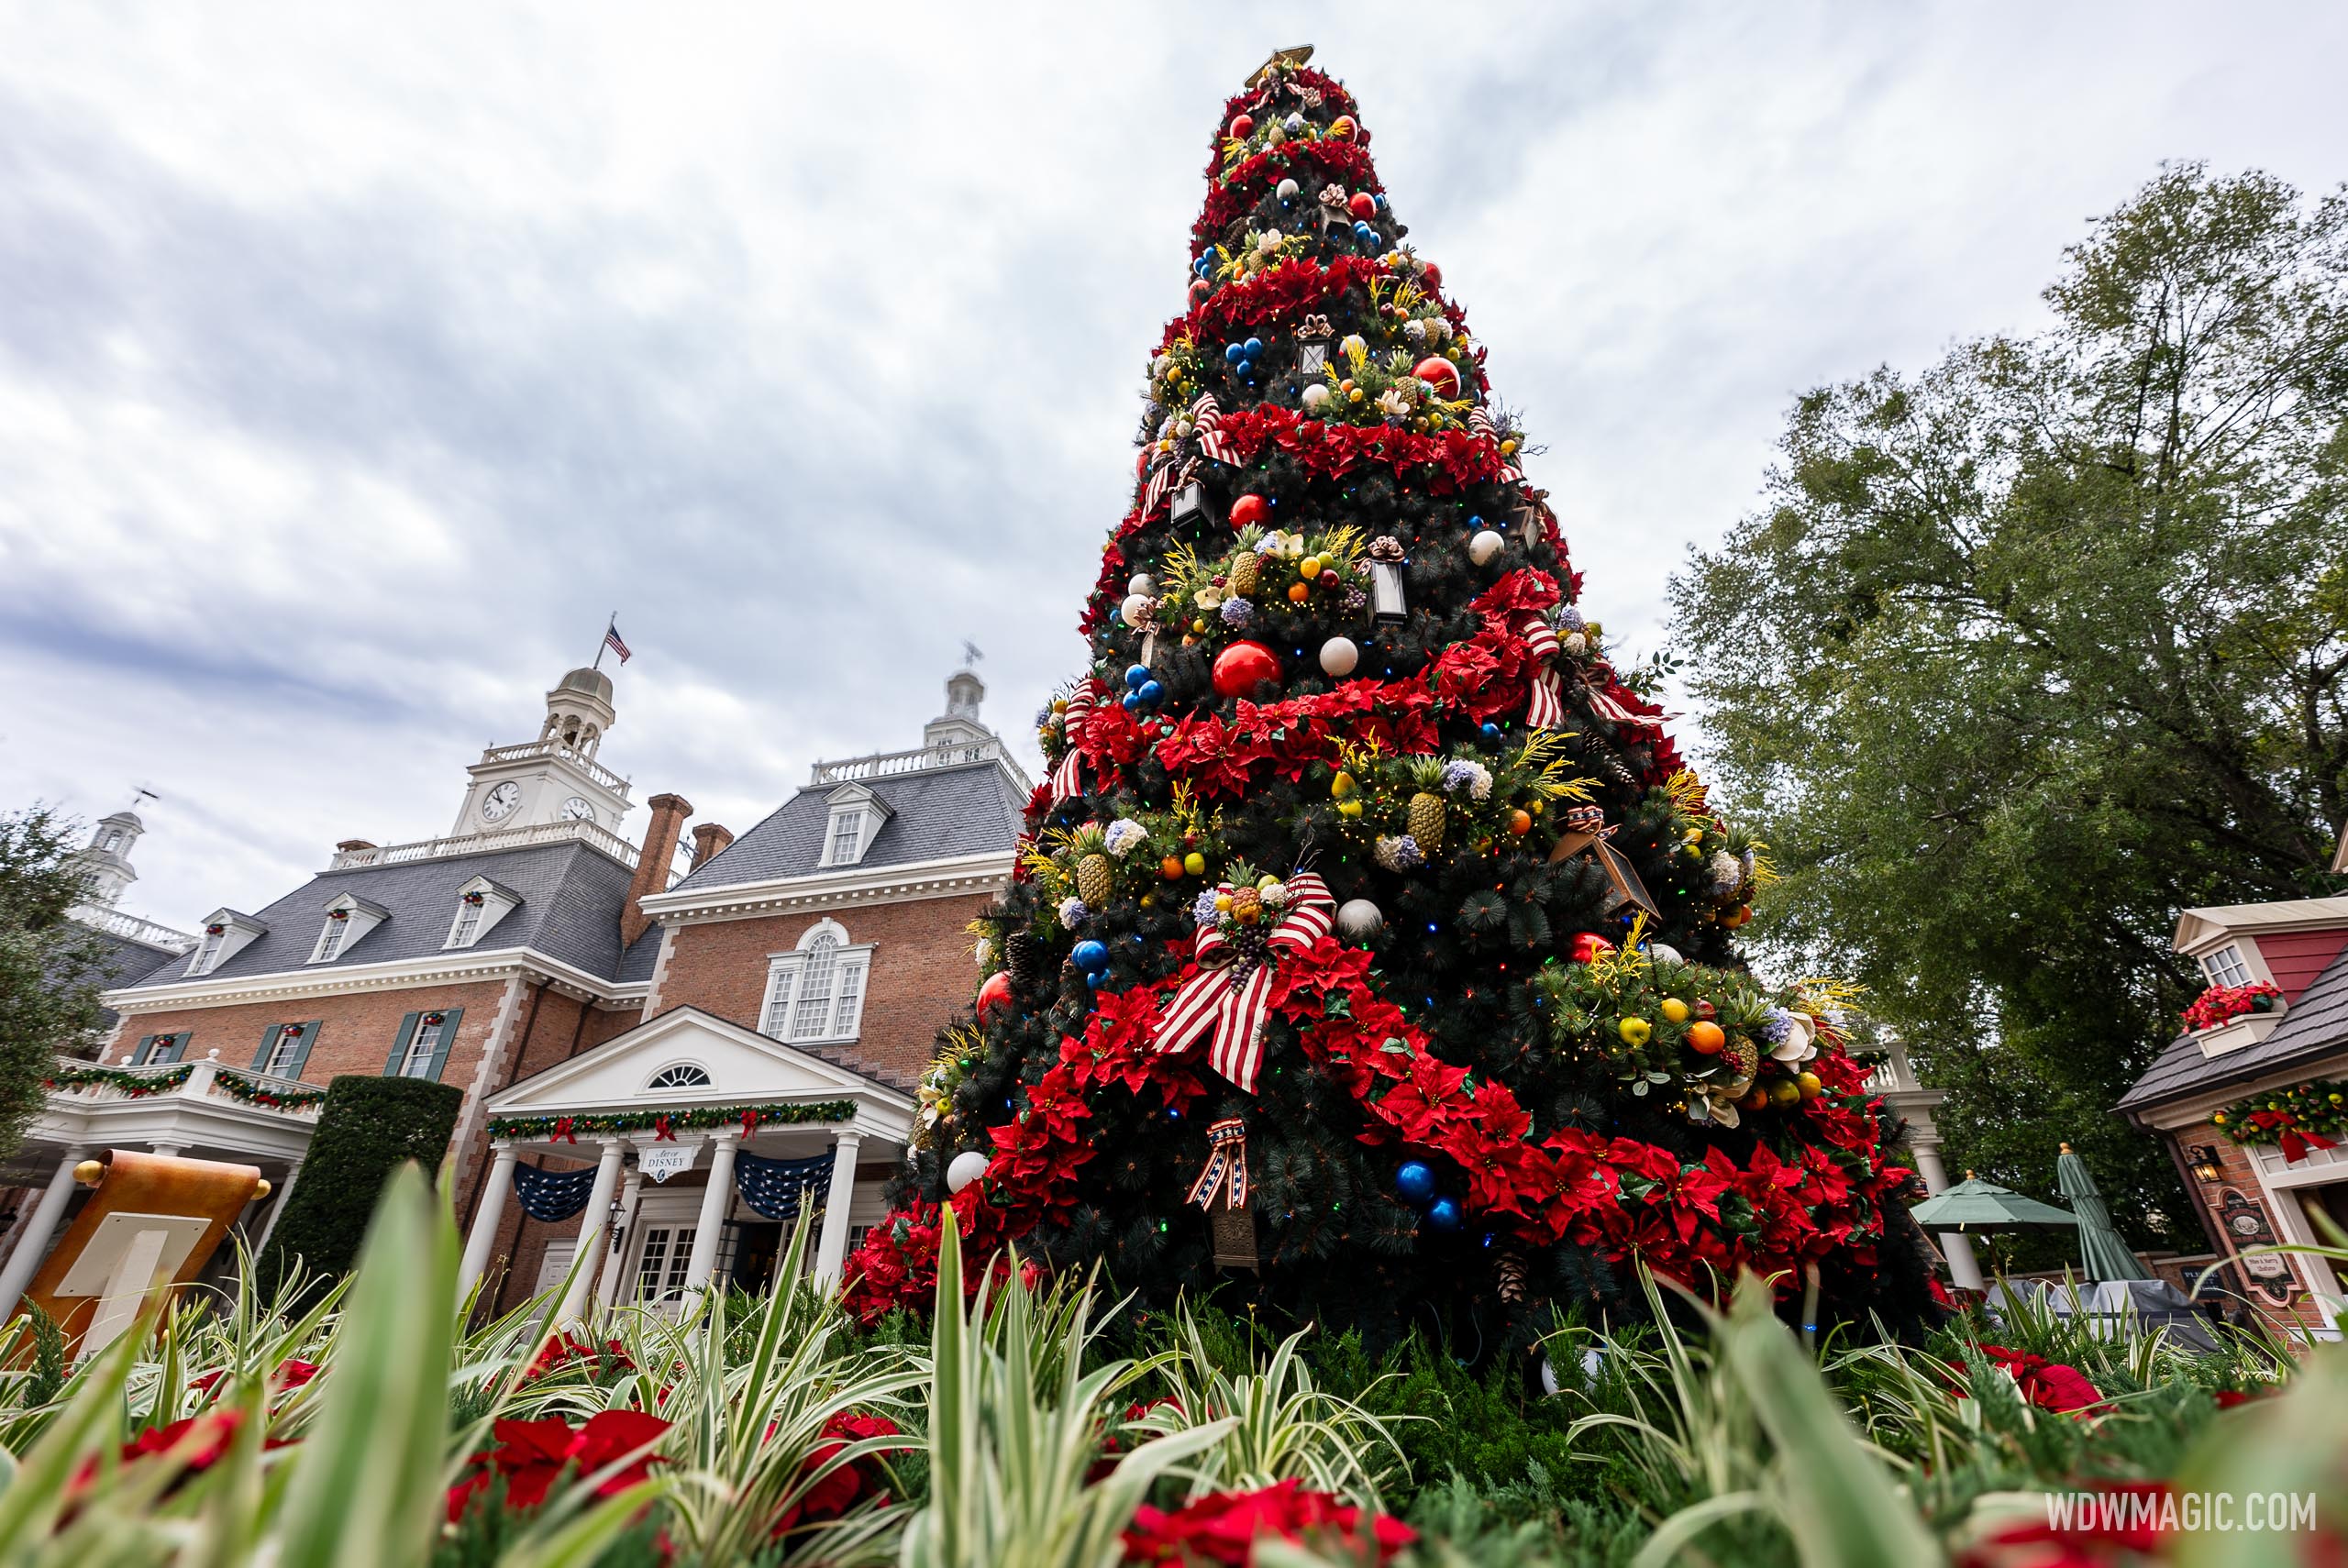 The American Adventure pavilion at EPCOT celebrates the holidays with gingerbread renditions of national monuments